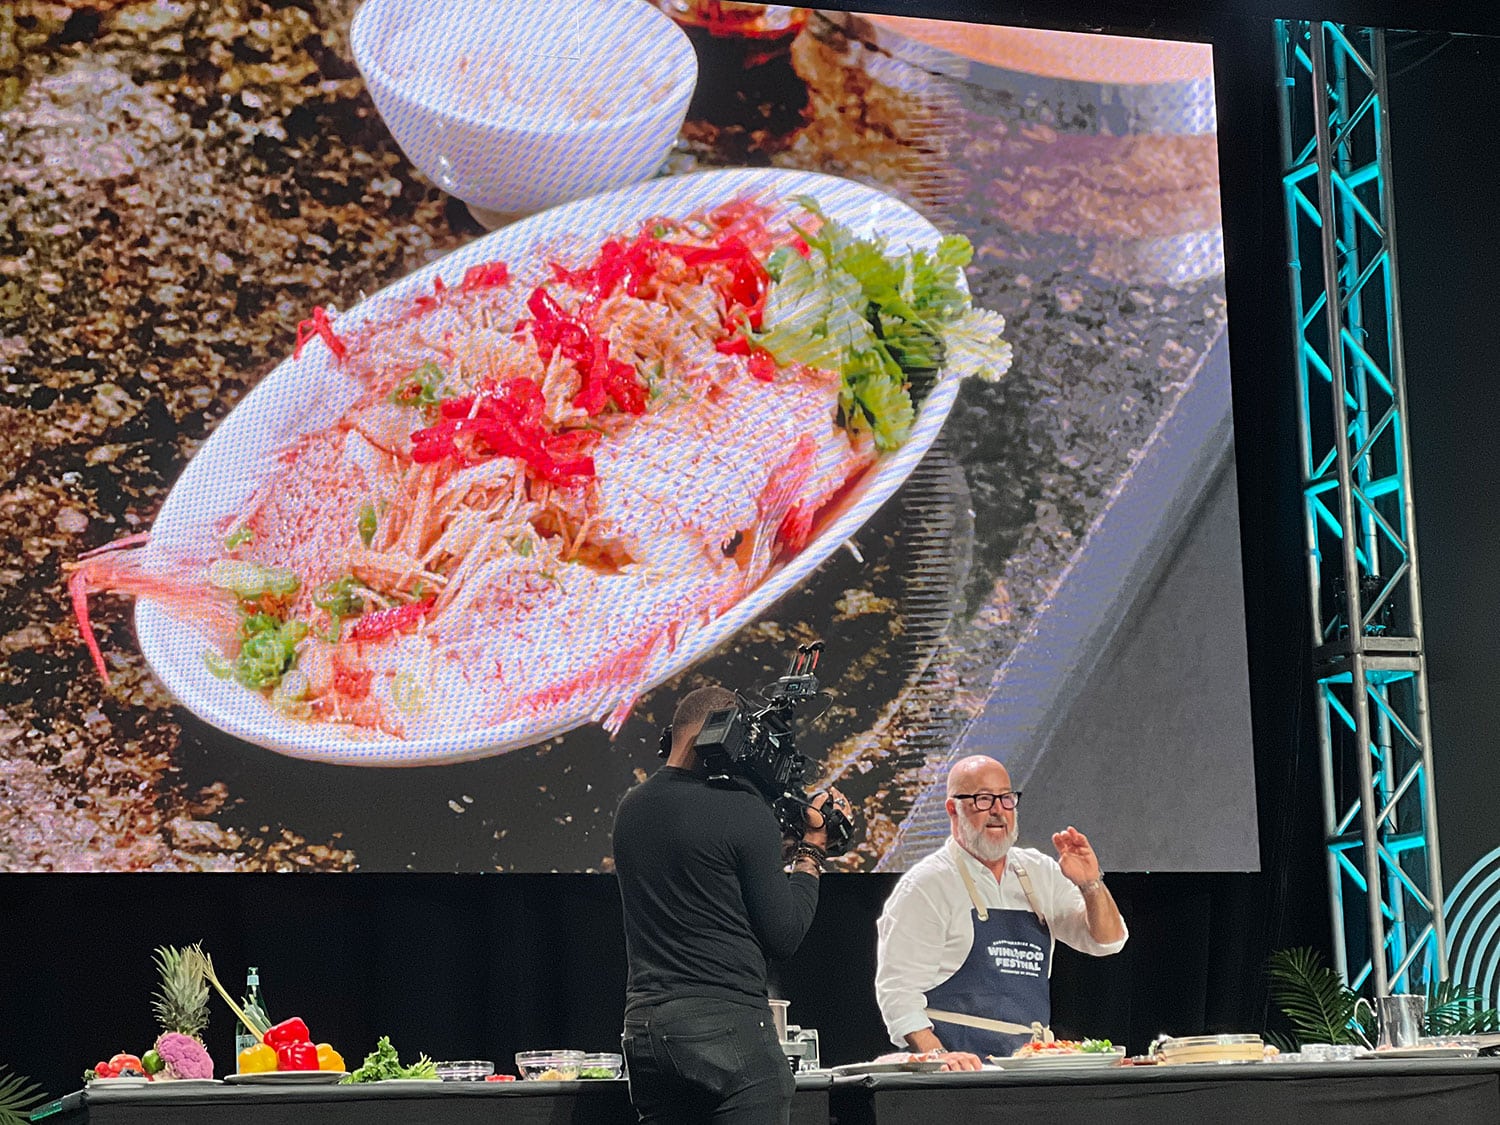 Chef Andrew Zimmern led a cooking demo focused on sustainability at the inaugural Nassau Paradise Island Wine and Food Festival at Atlantis Paradise Island.